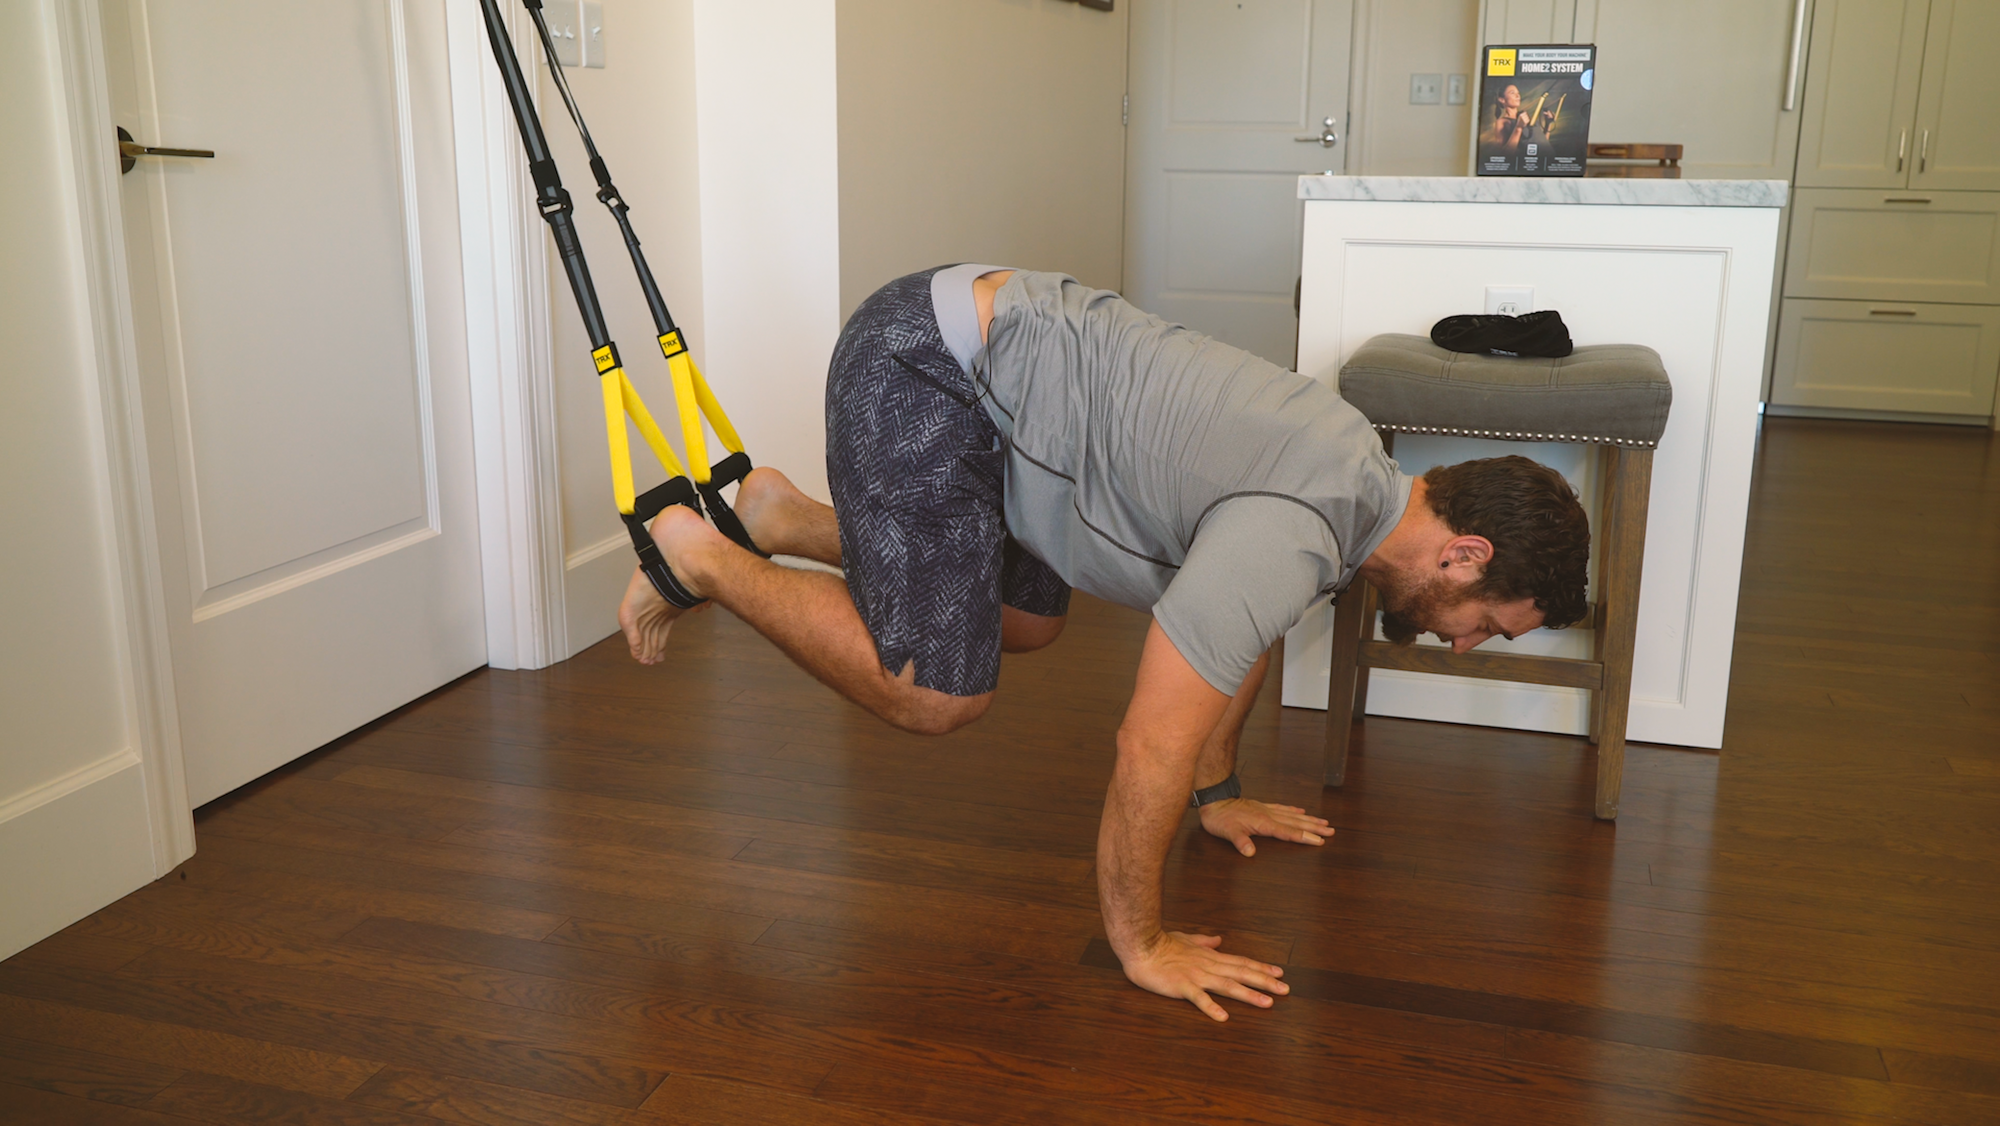 Moves of the Week: A 15-Minute TRX Home Workout